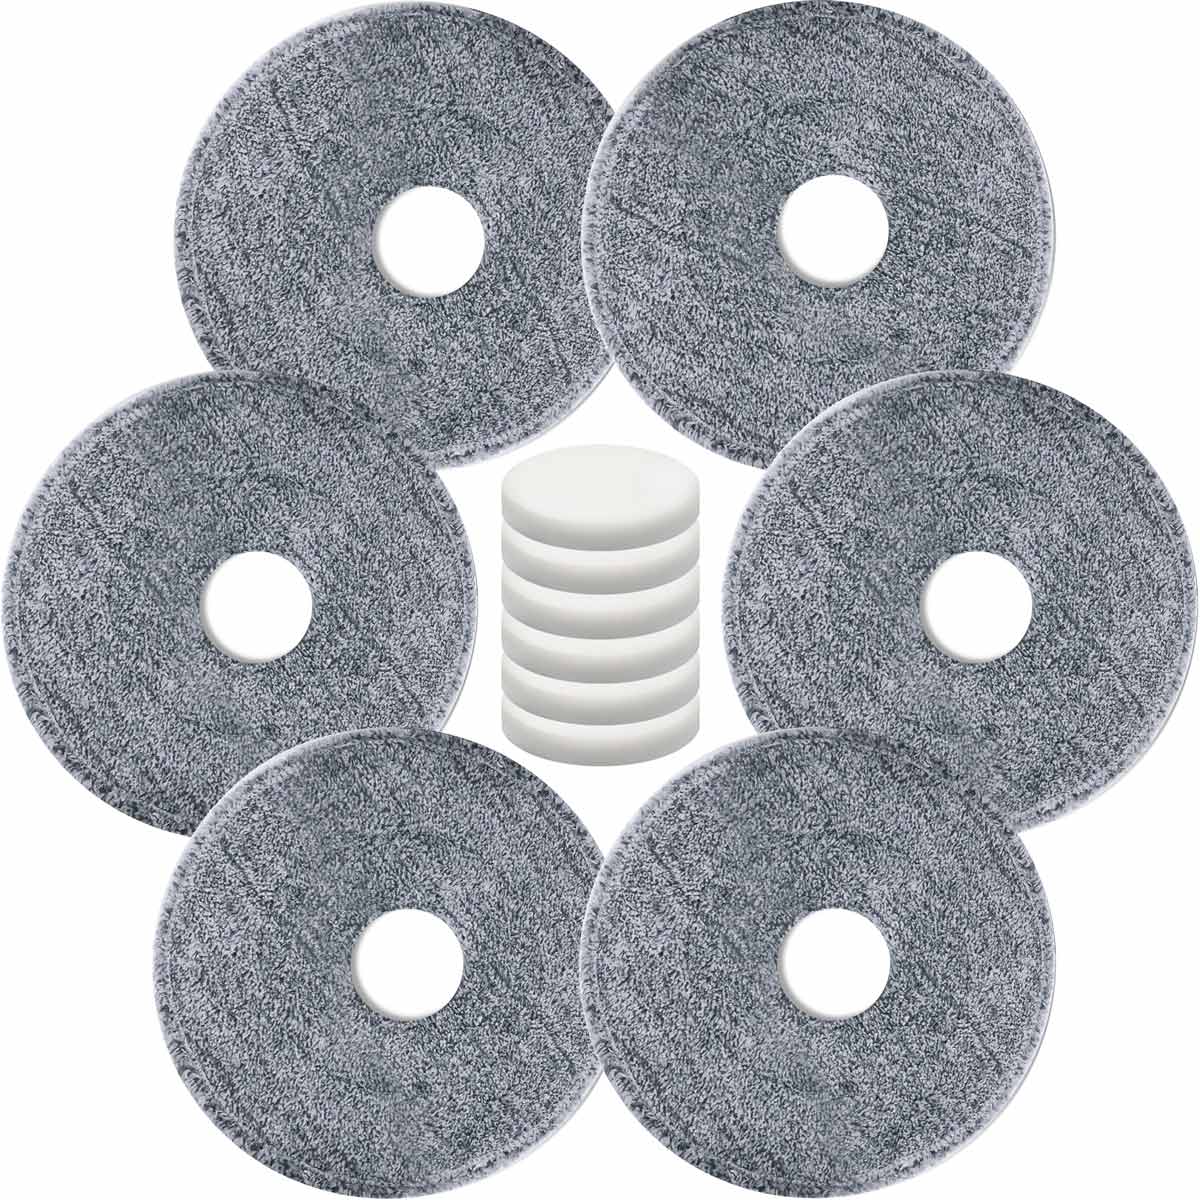 iMOP 10" Spin Mop Head Replacements and Water Filter Refill Sets